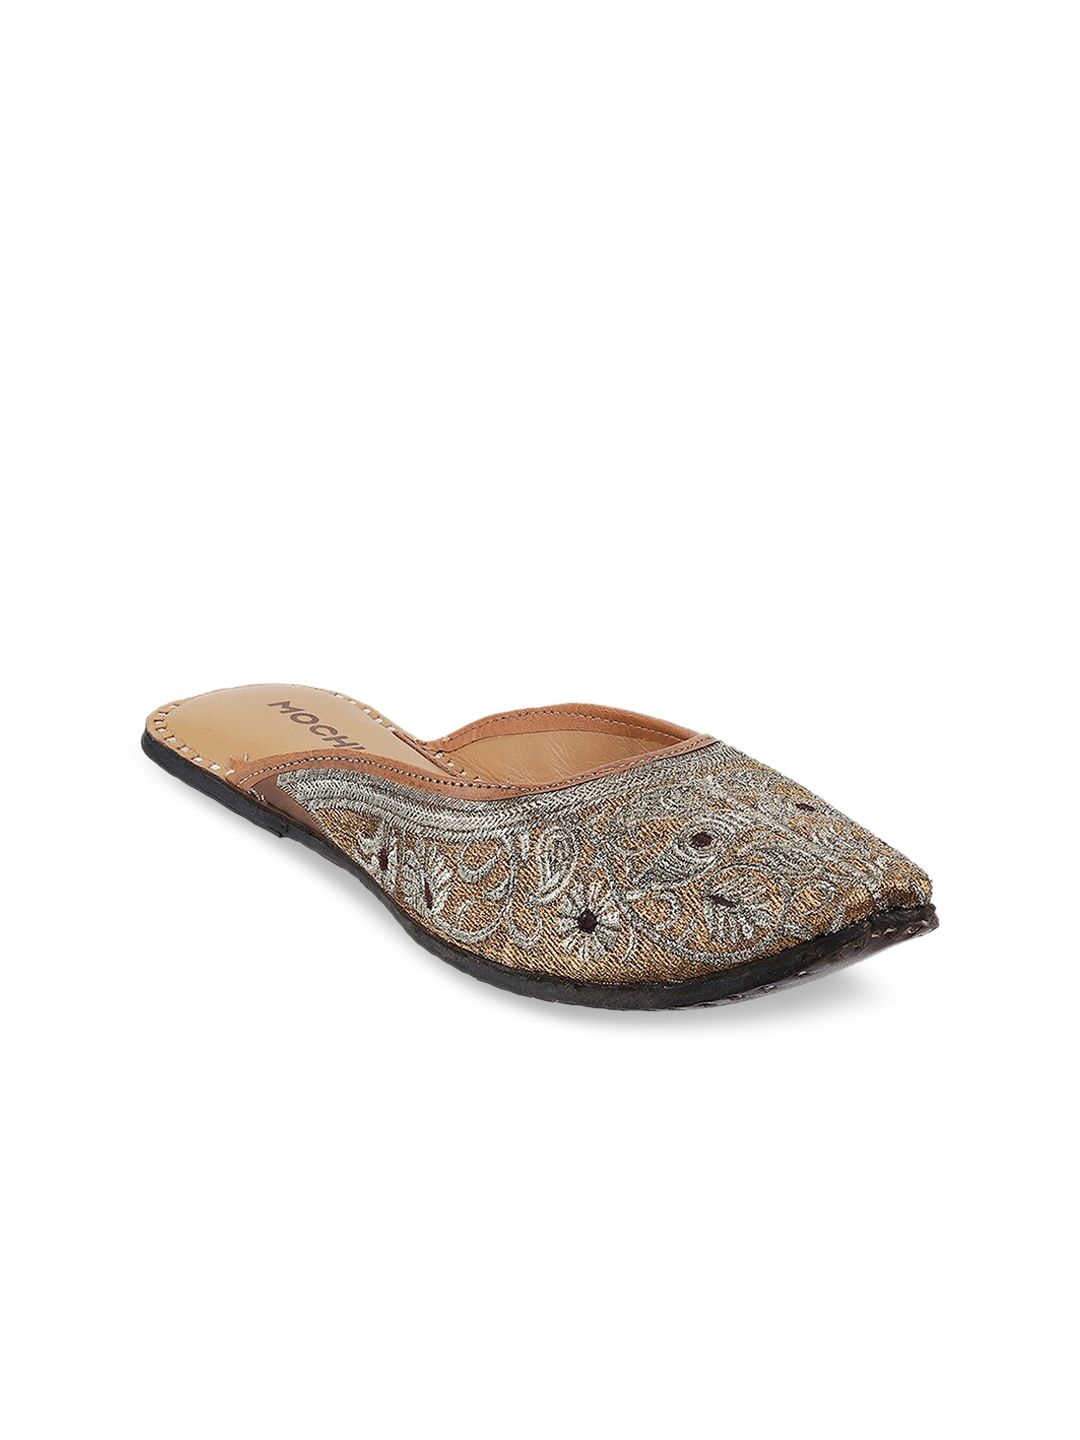 Mochi Women Gold-Toned Printed Ballerinas with Laser Cuts Flats Price in India